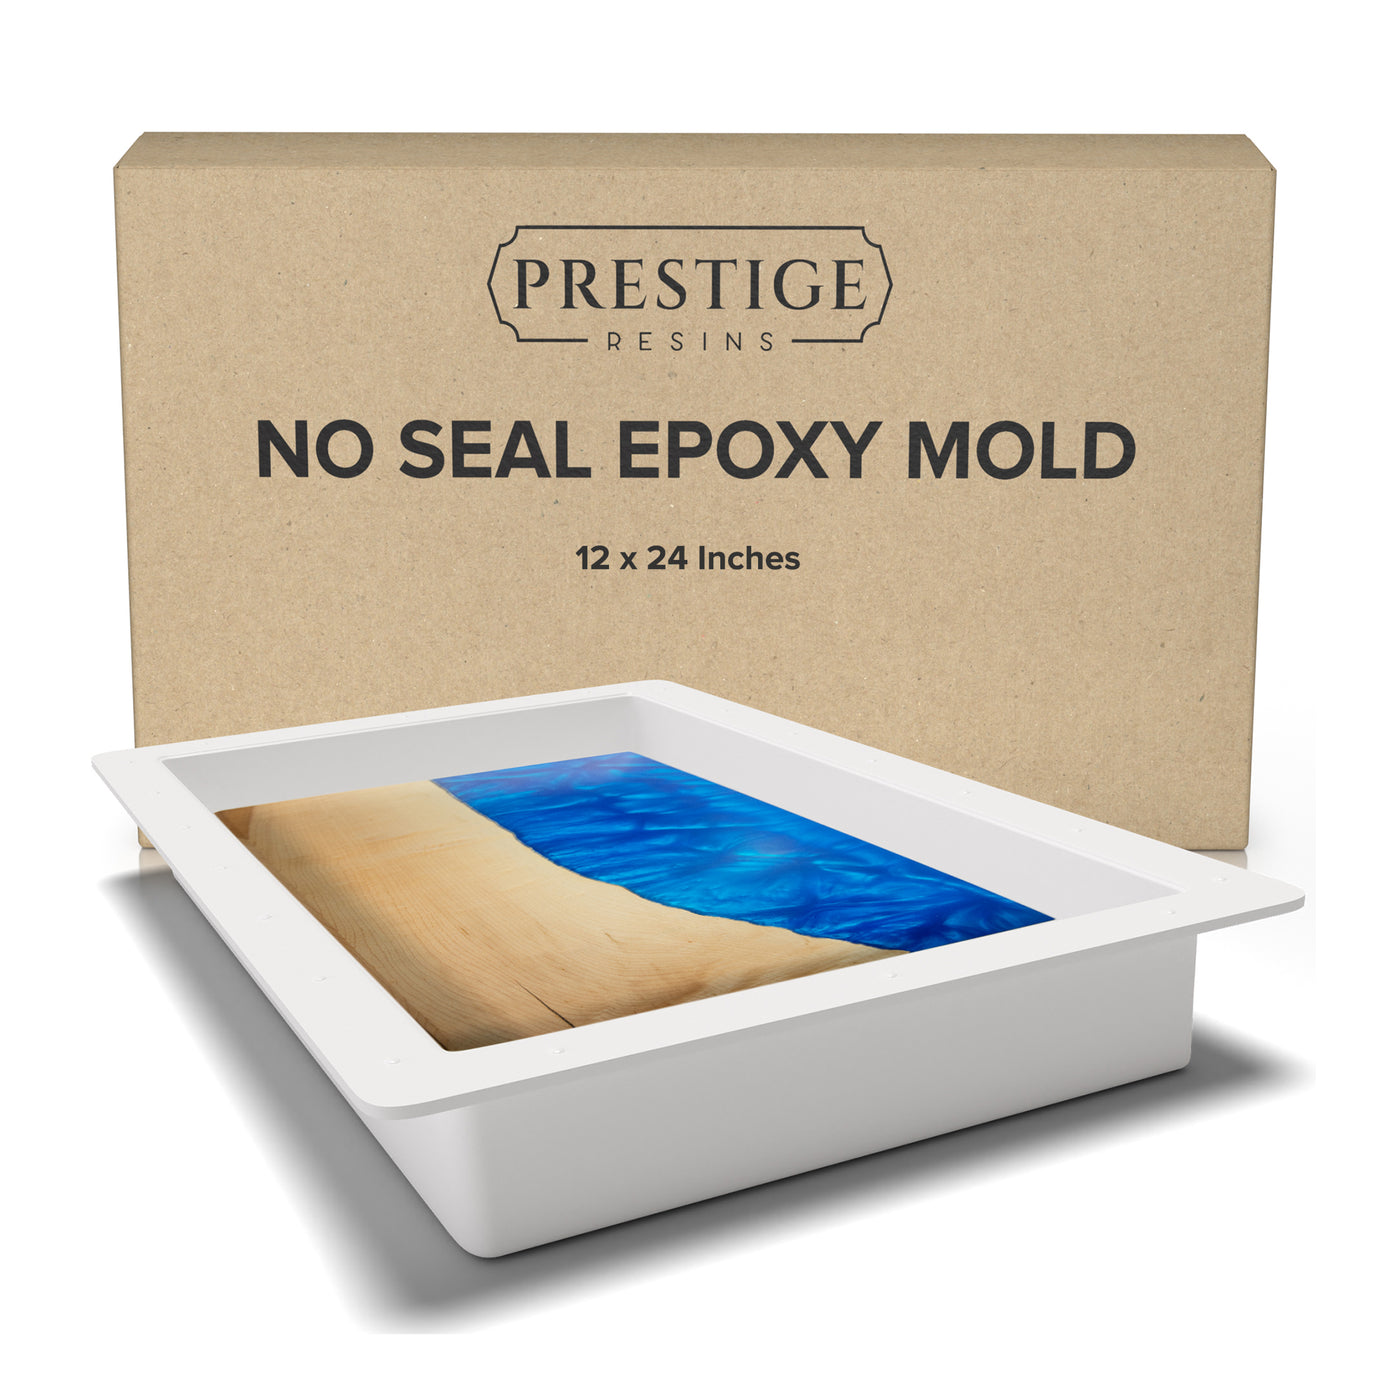 Epoxy Mold No Seal Thermoformed HDPE